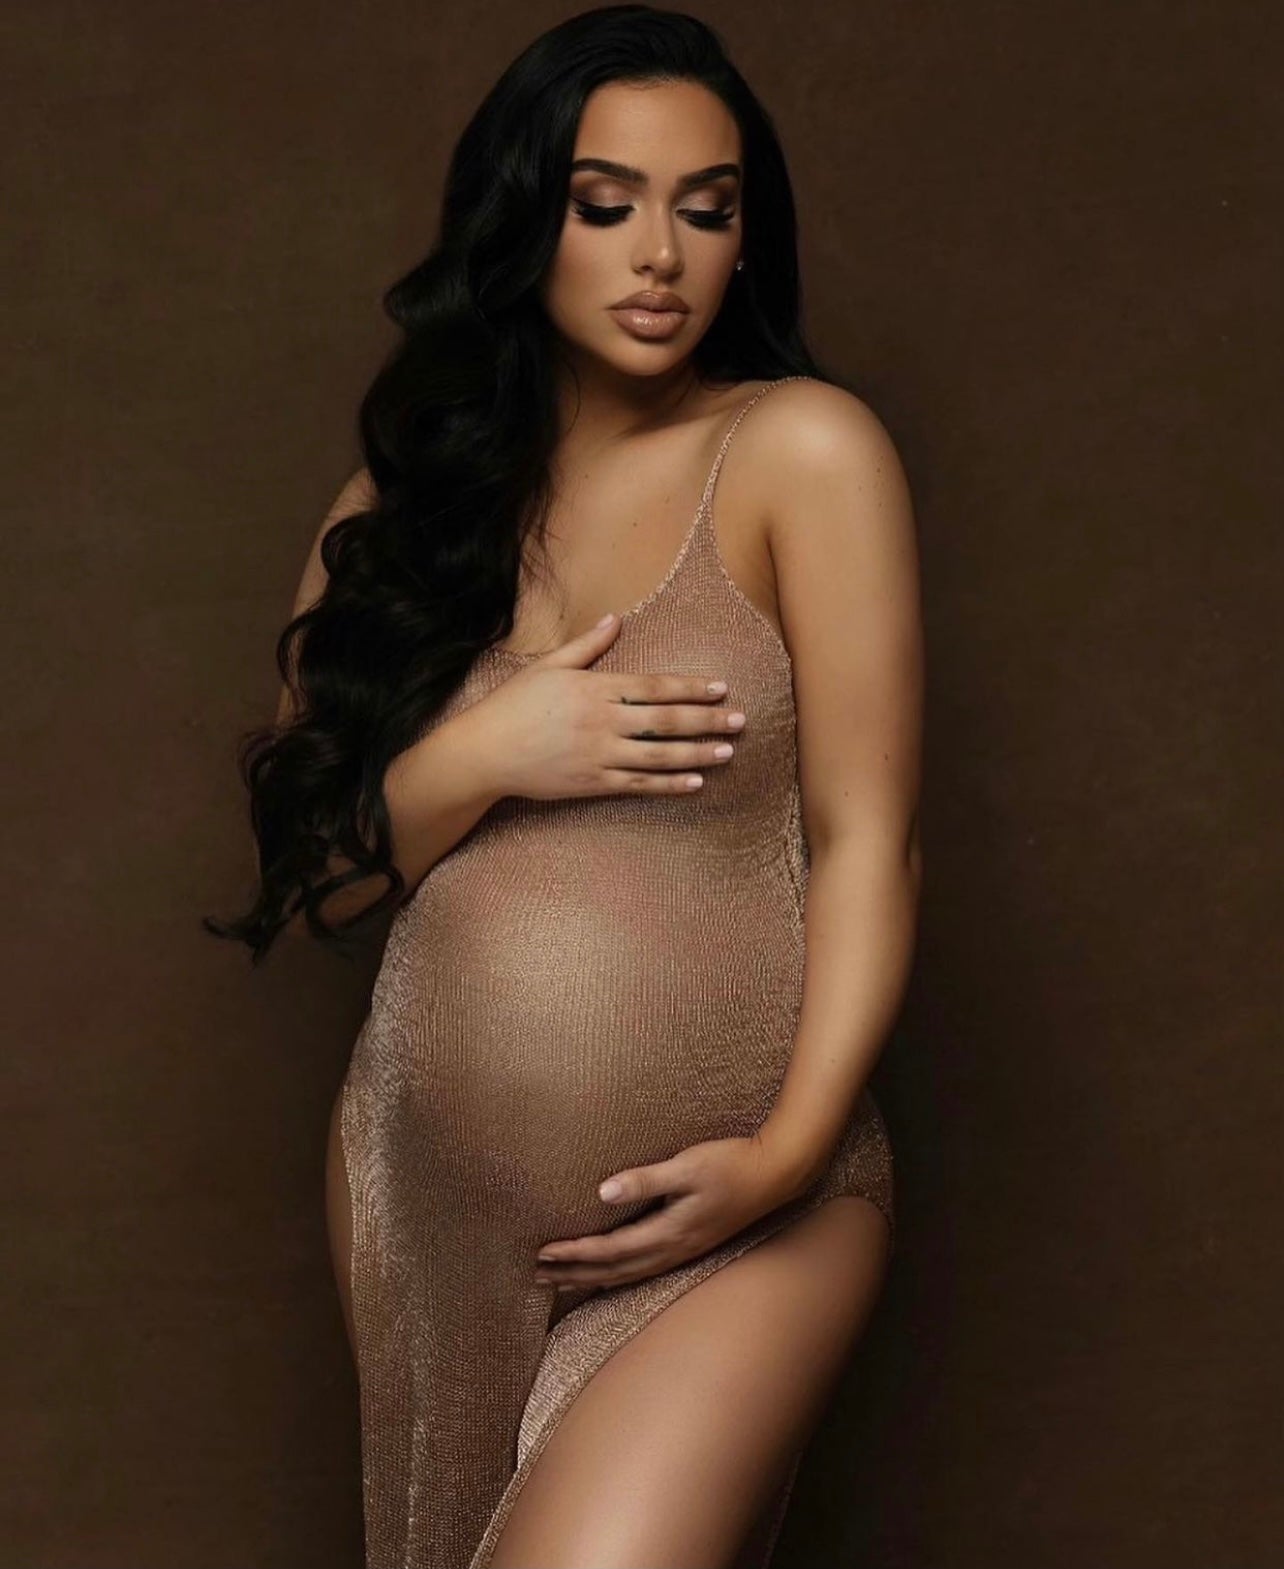 This gorgeous Cleopatra Sensual Maternity Dress Gown is in a class of its own. Wear this maternity dress to feel your sensuality during your pregnancy or for your maternity photoshoot or boudoir photos. Even use it as a over your swimsuit as a cover. 